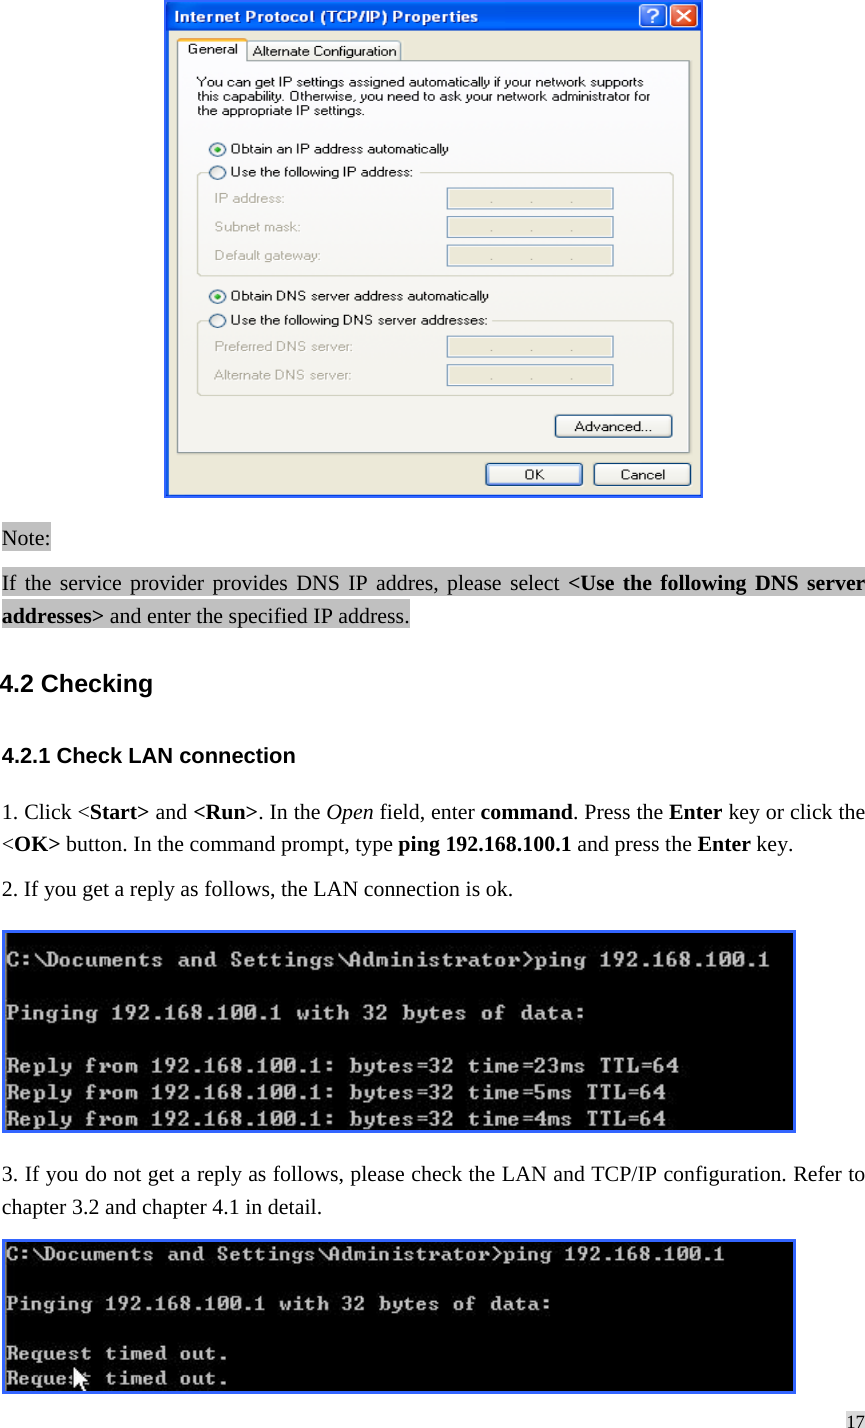 17   Note: If the service provider provides DNS IP addres, please select &lt;Use the following DNS server addresses&gt; and enter the specified IP address. 4.2 Checking 4.2.1 Check LAN connection 1. Click &lt;Start&gt; and &lt;Run&gt;. In the Open field, enter command. Press the Enter key or click the &lt;OK&gt; button. In the command prompt, type ping 192.168.100.1 and press the Enter key. 2. If you get a reply as follows, the LAN connection is ok.  3. If you do not get a reply as follows, please check the LAN and TCP/IP configuration. Refer to chapter 3.2 and chapter 4.1 in detail.  